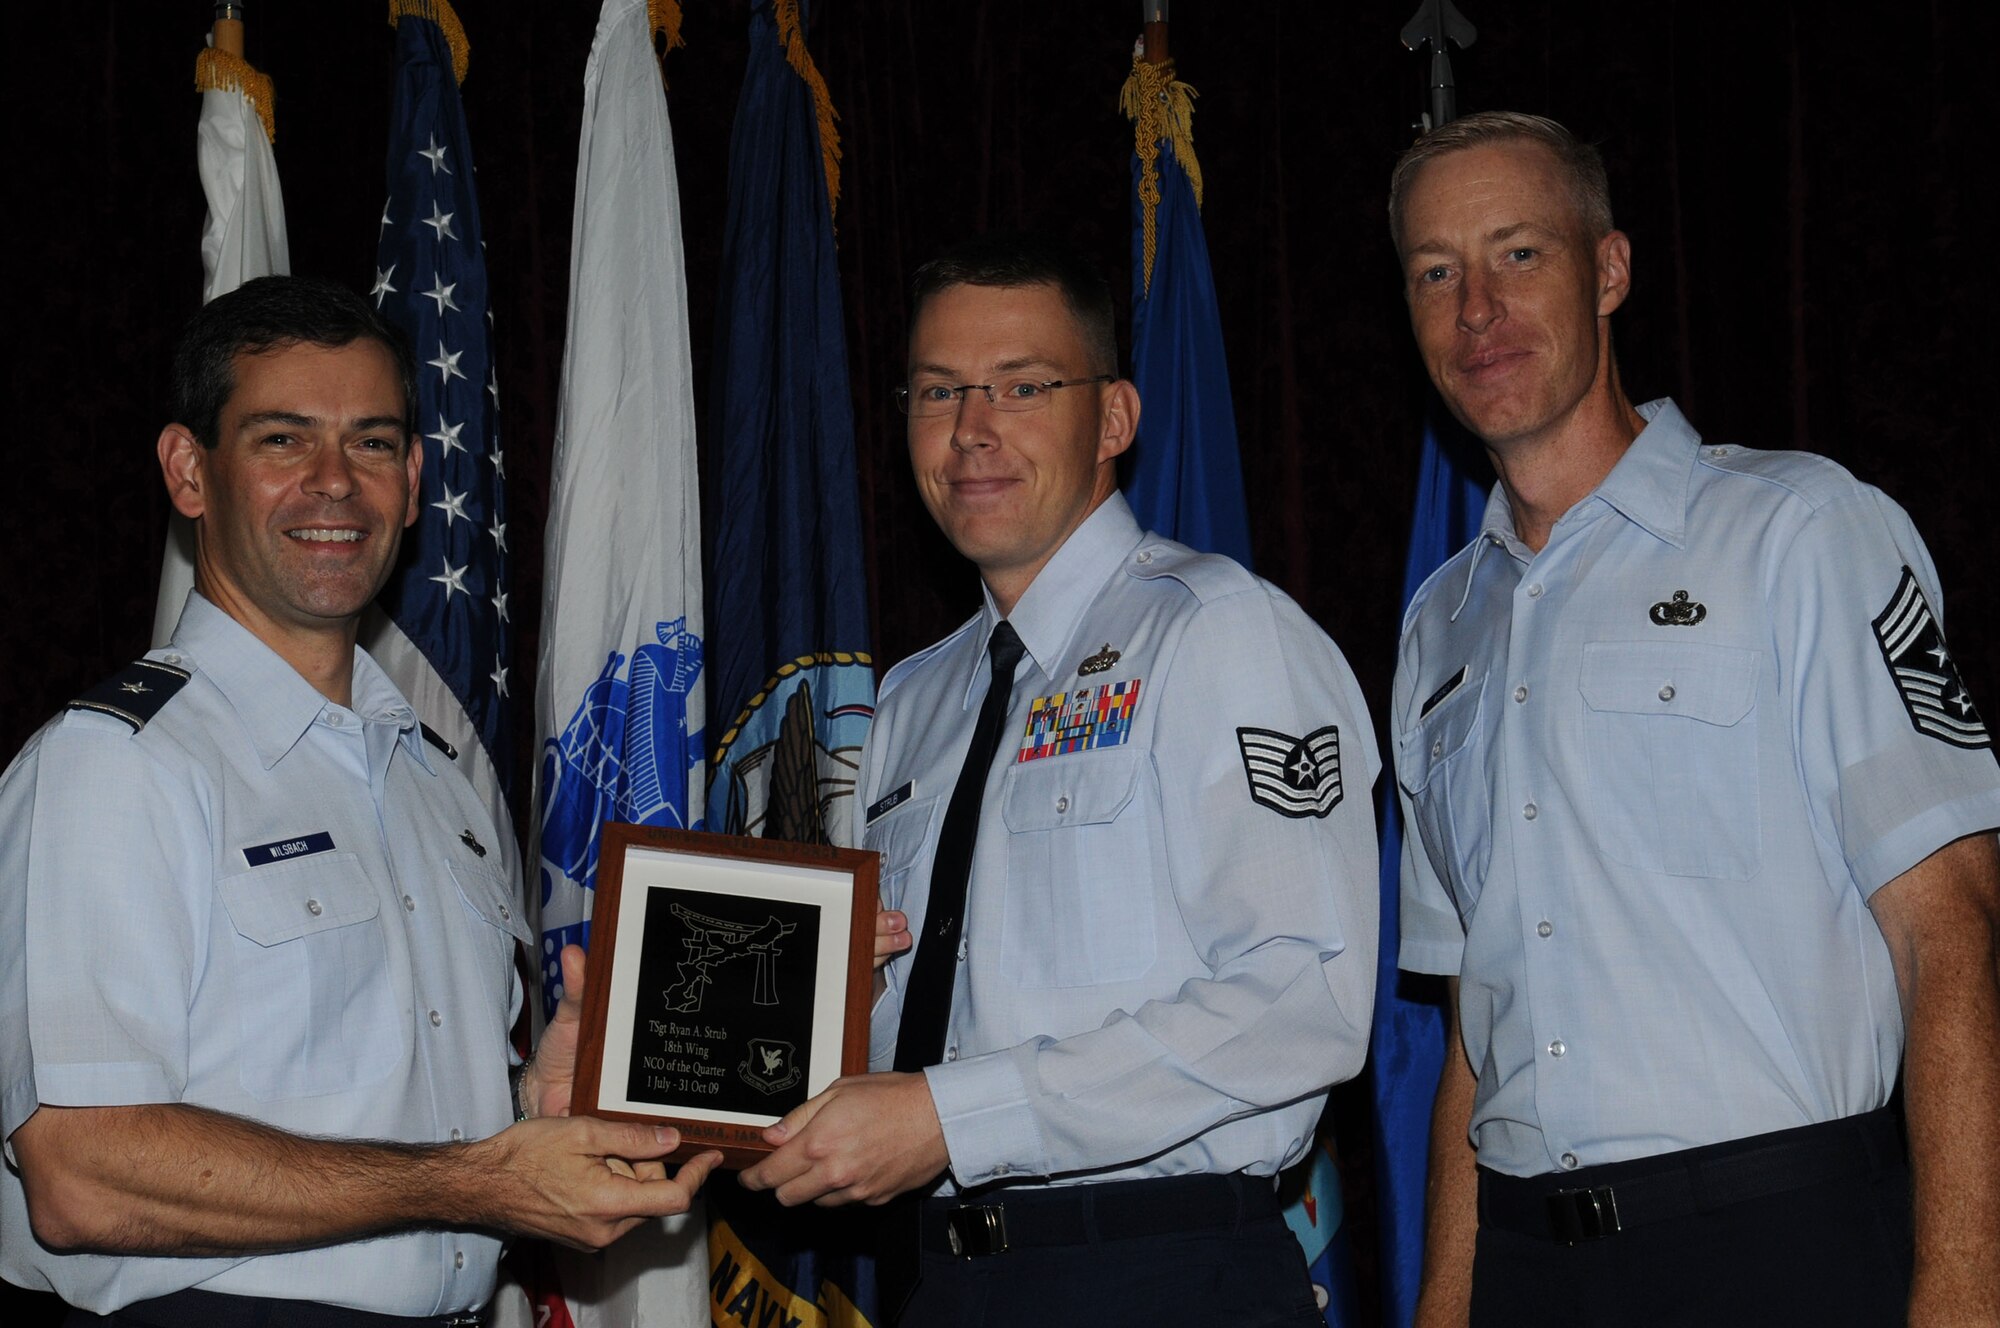 Tech. Sgt. Ryan Strub, 18th Logistics Readiness Squadron, was named the 18th Wing NCO of the Quarter.